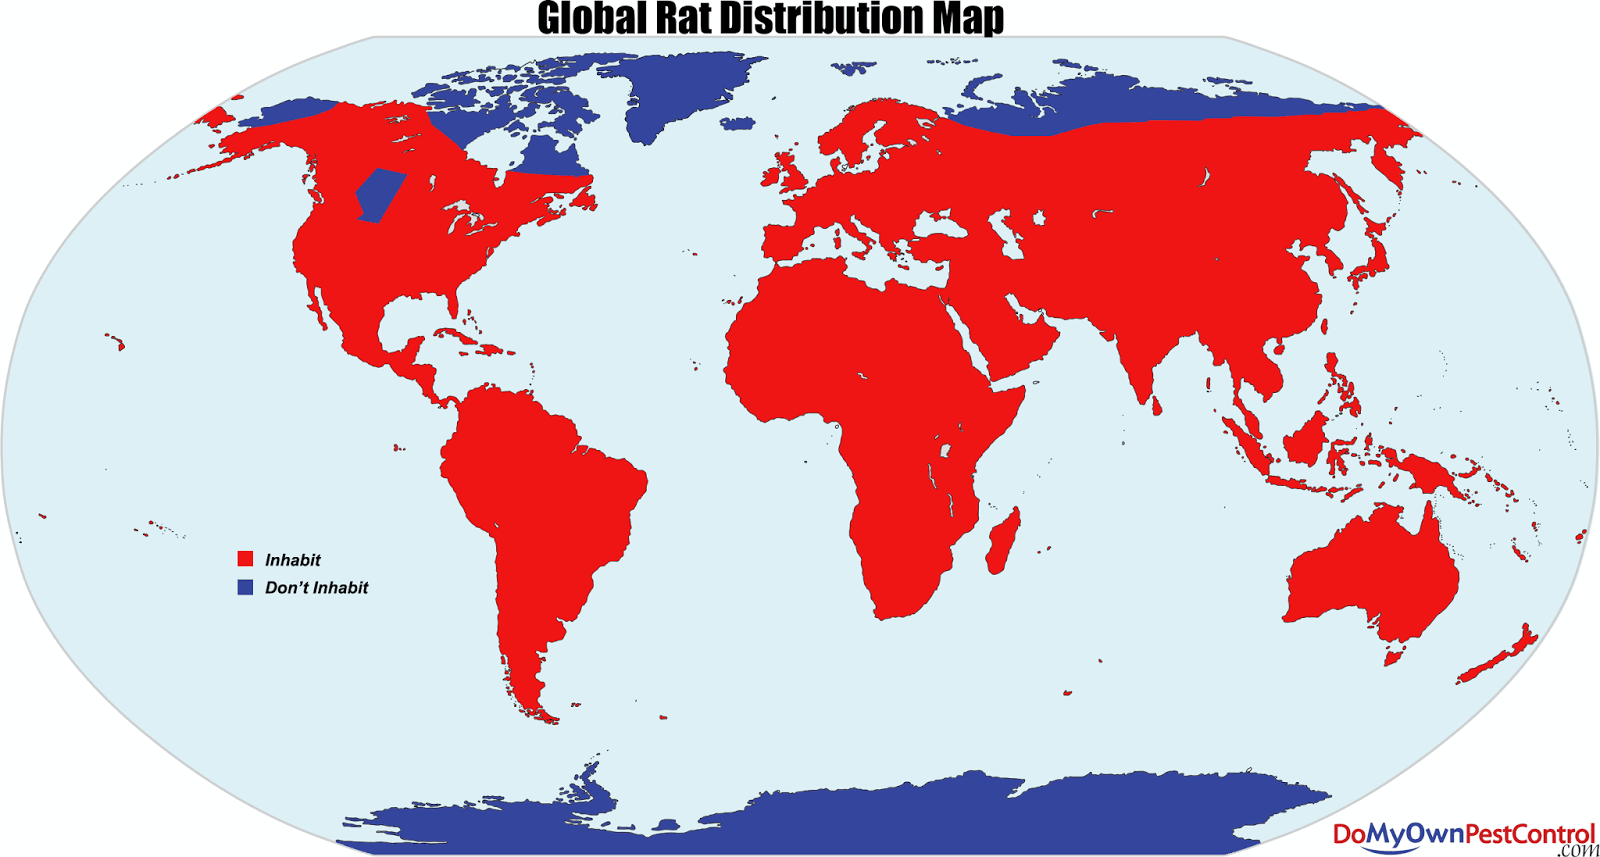 TIL there are no rats in Iceland